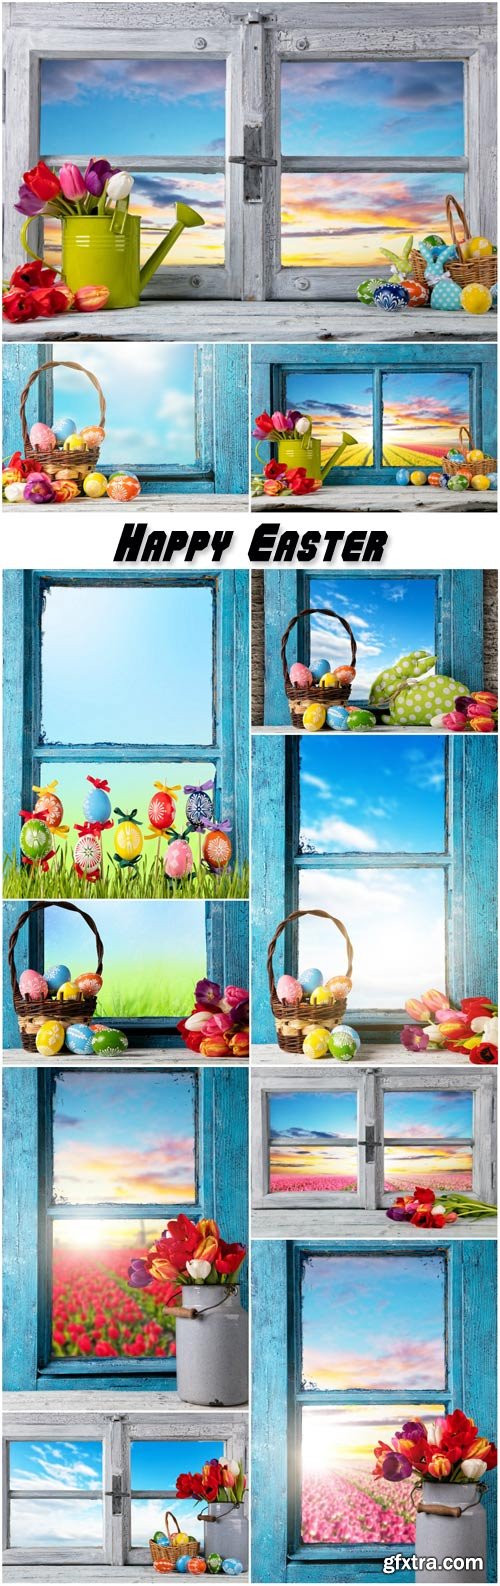 Easter still life decoration with rustic window